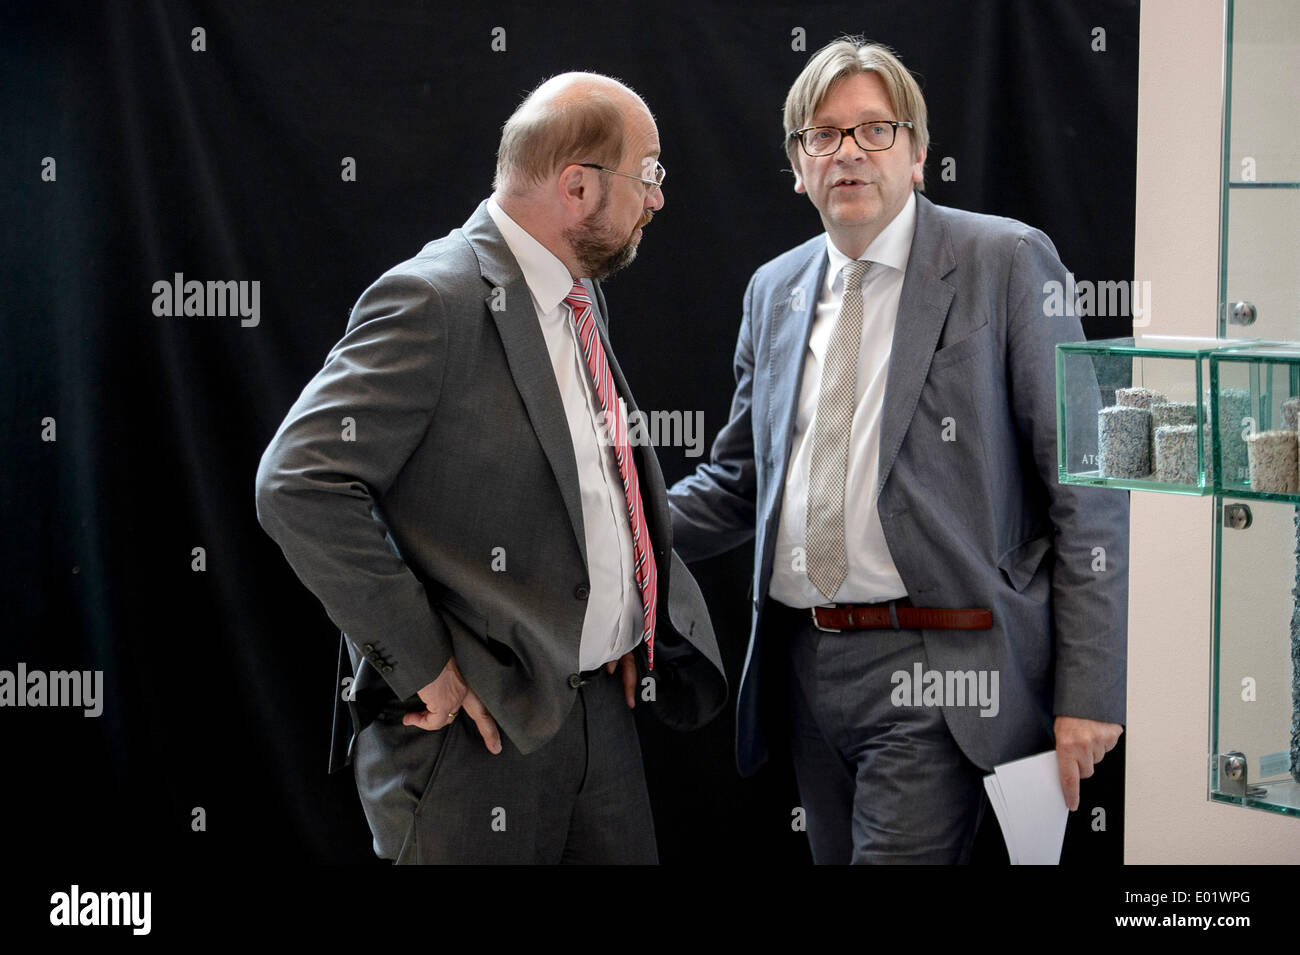 Brussels, Belgium. 29th April 2014. Guy Verhofstadt (L), top candidate of Liberals (ALDE) and Martin Schulz (R ), top candidate of the Party of European Socialists (PSE) chat ahead of Euranet's 'Big Crunch' Presidential debate at the EU parliament in BrusselsThe four top candidates for the presidency of the European Commission - Jean-Claude Juncker, Ska Keller, Martin Schulz and Guy Verhofstadt - attend EU-wide debate organized by EuranetPlus and focused on the major election topics. Credit:  dpa picture alliance/Alamy Live News Stock Photo